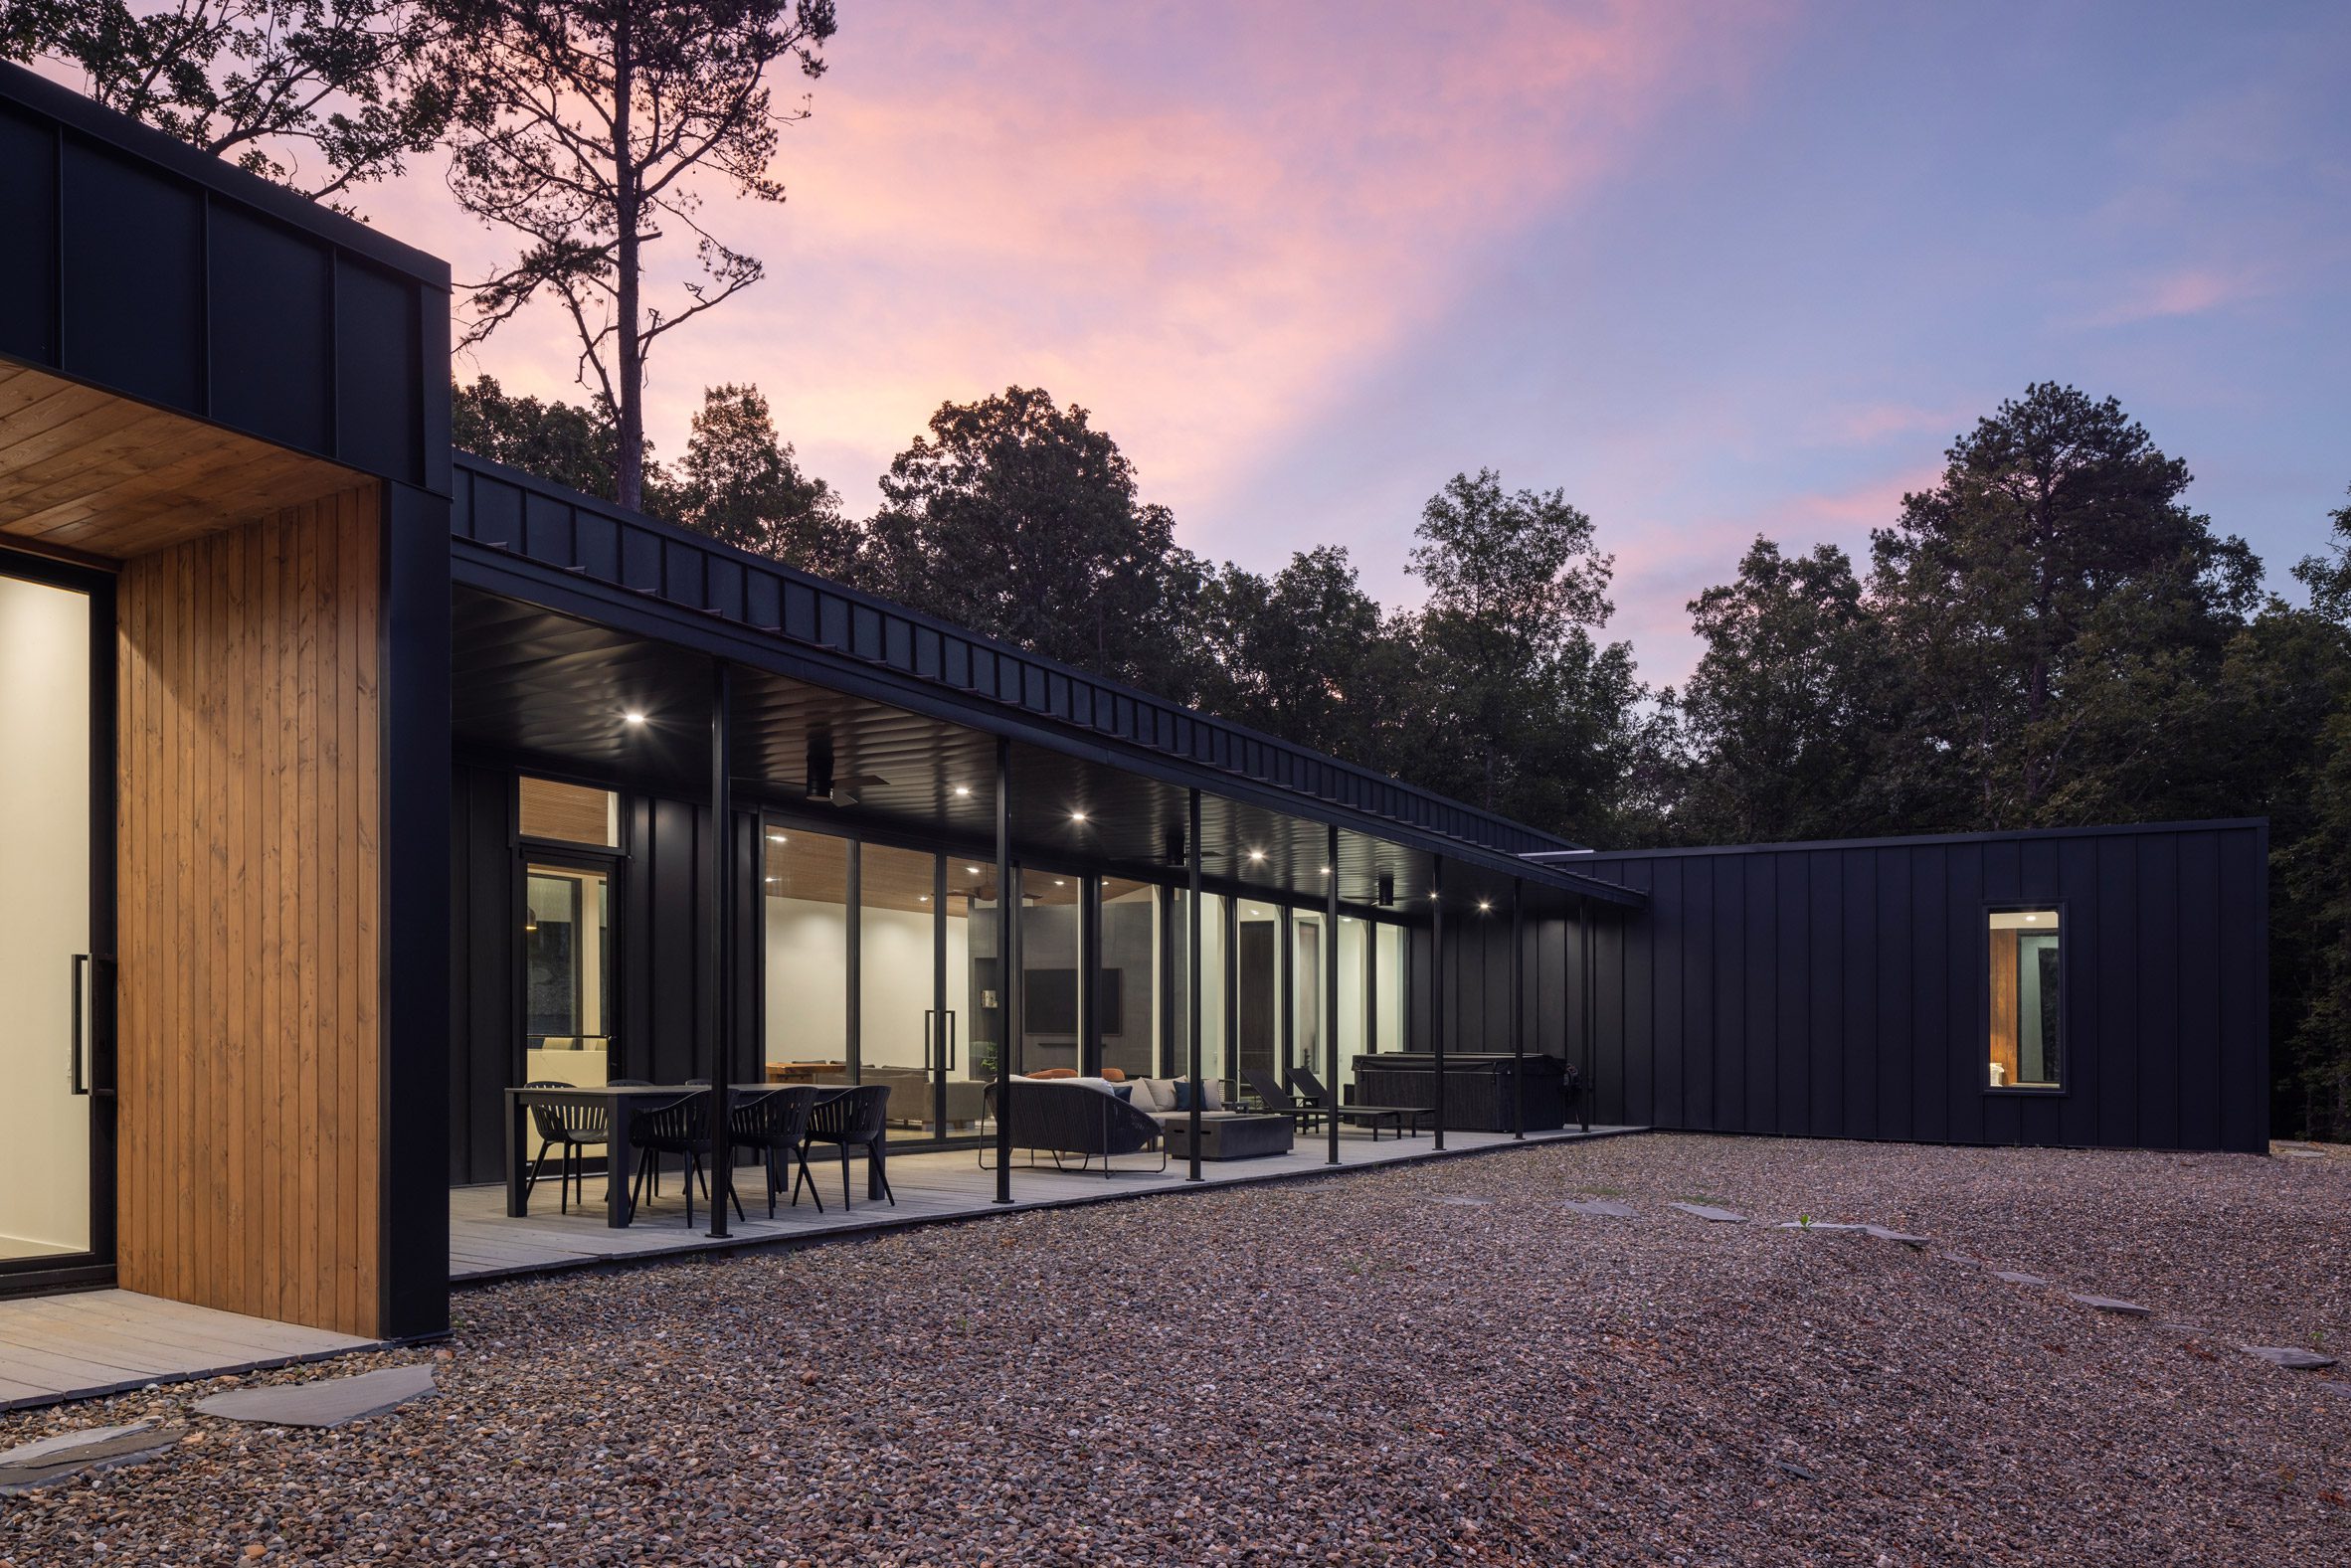 Patio and metal cladding of Oklahoma cabin by Far + Dang